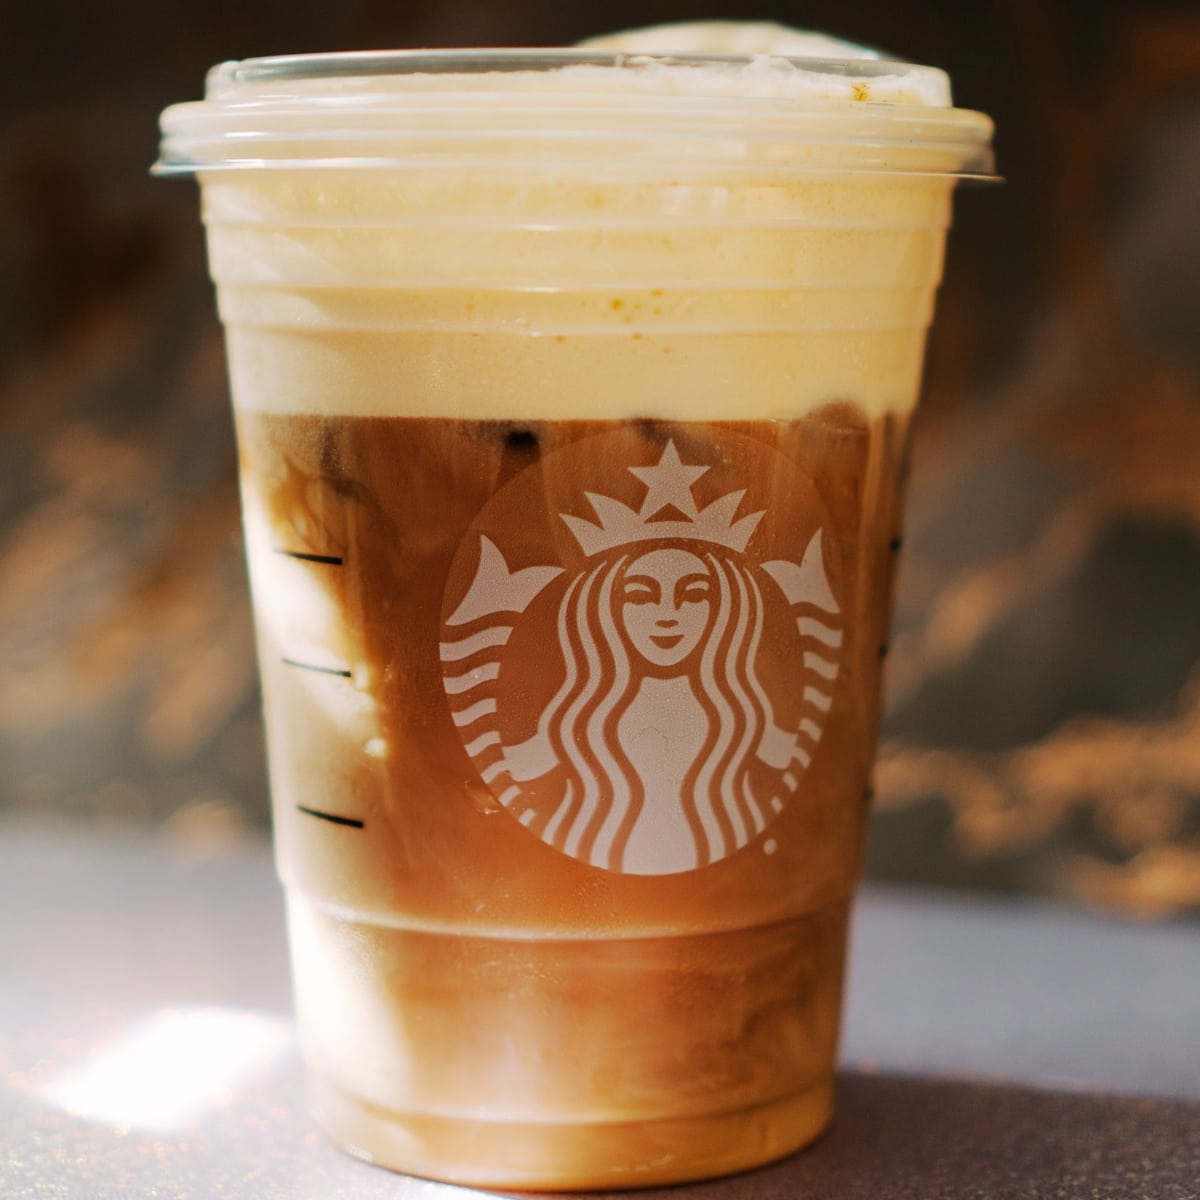 An iced Starbucks beverage in a Starbucks cup.